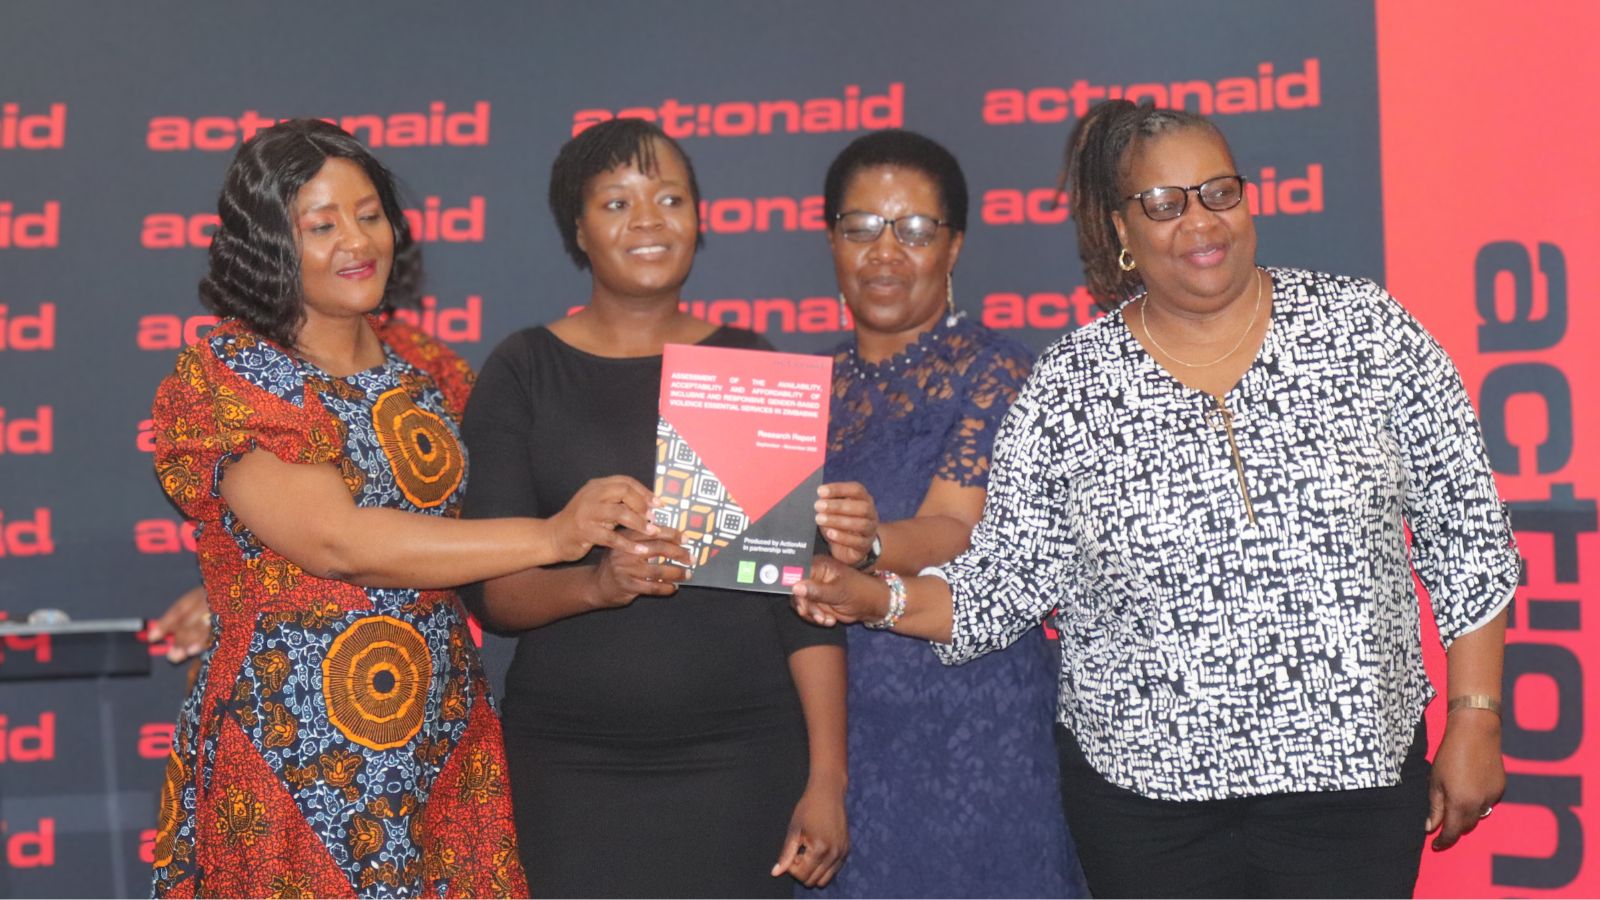 “Ensure there is provision of GBV essential services,” ActionAid Zimbabwe